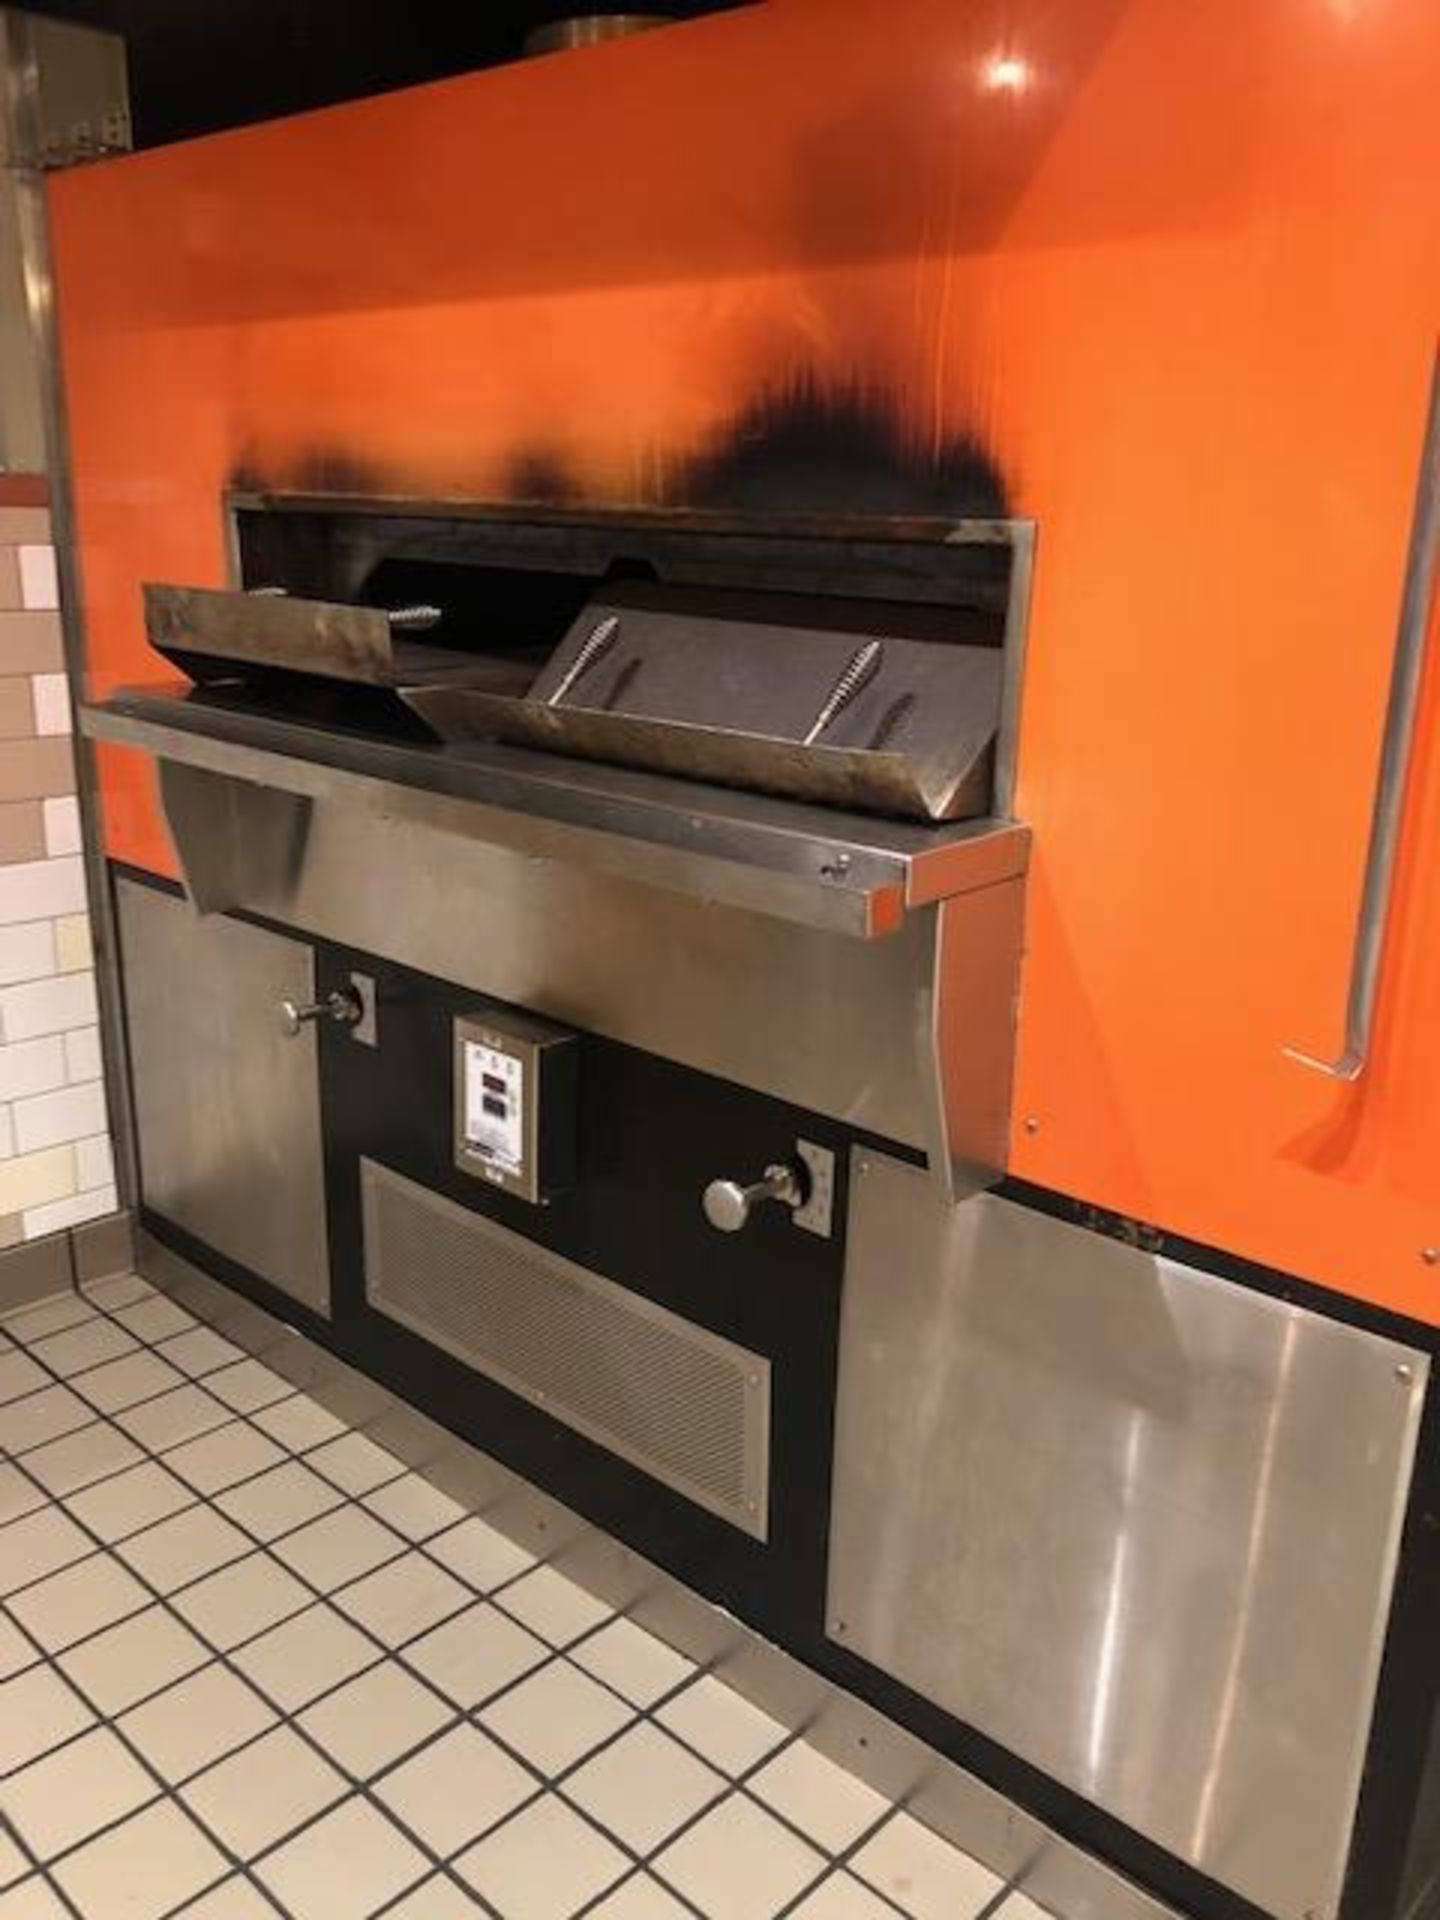 FAMOUS WOODSTONE BRAND PIZZA OVEN. DECKS ARE PERFECT UNIT IS LATE MODEL LIKE NEW. REMOVAL AVAILABLE.